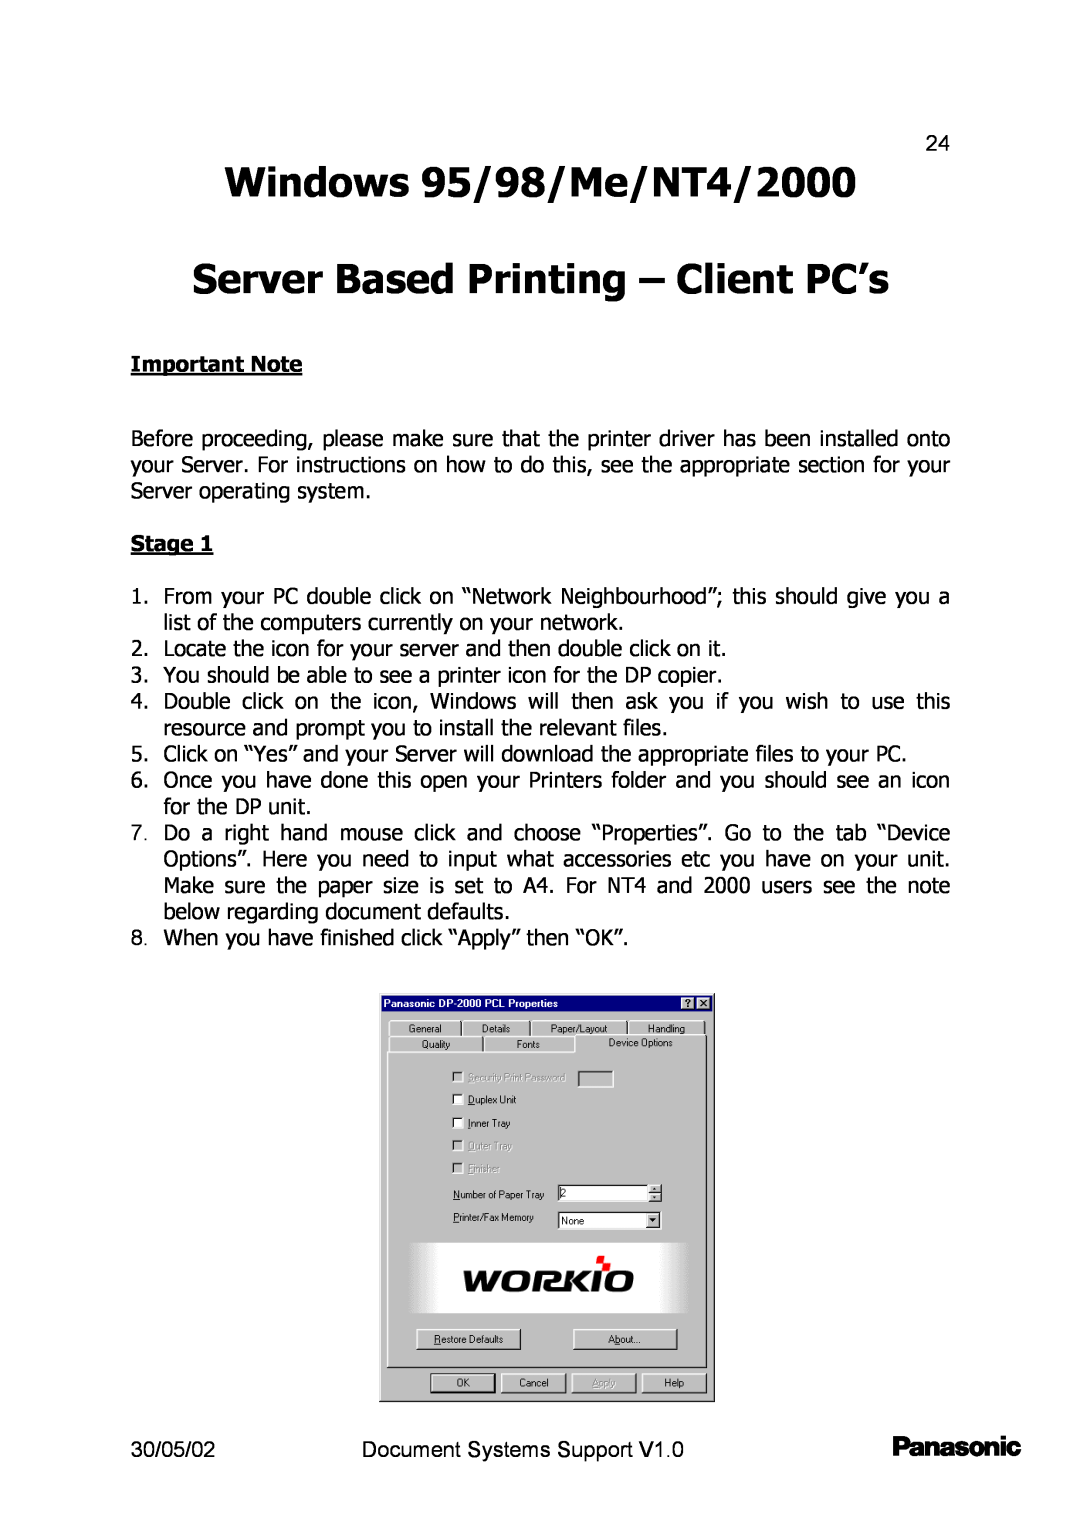 Barco DP2000/2500 setup guide Windows 95/98/Me/NT4/2000 Server Based Printing - Client PC’s 